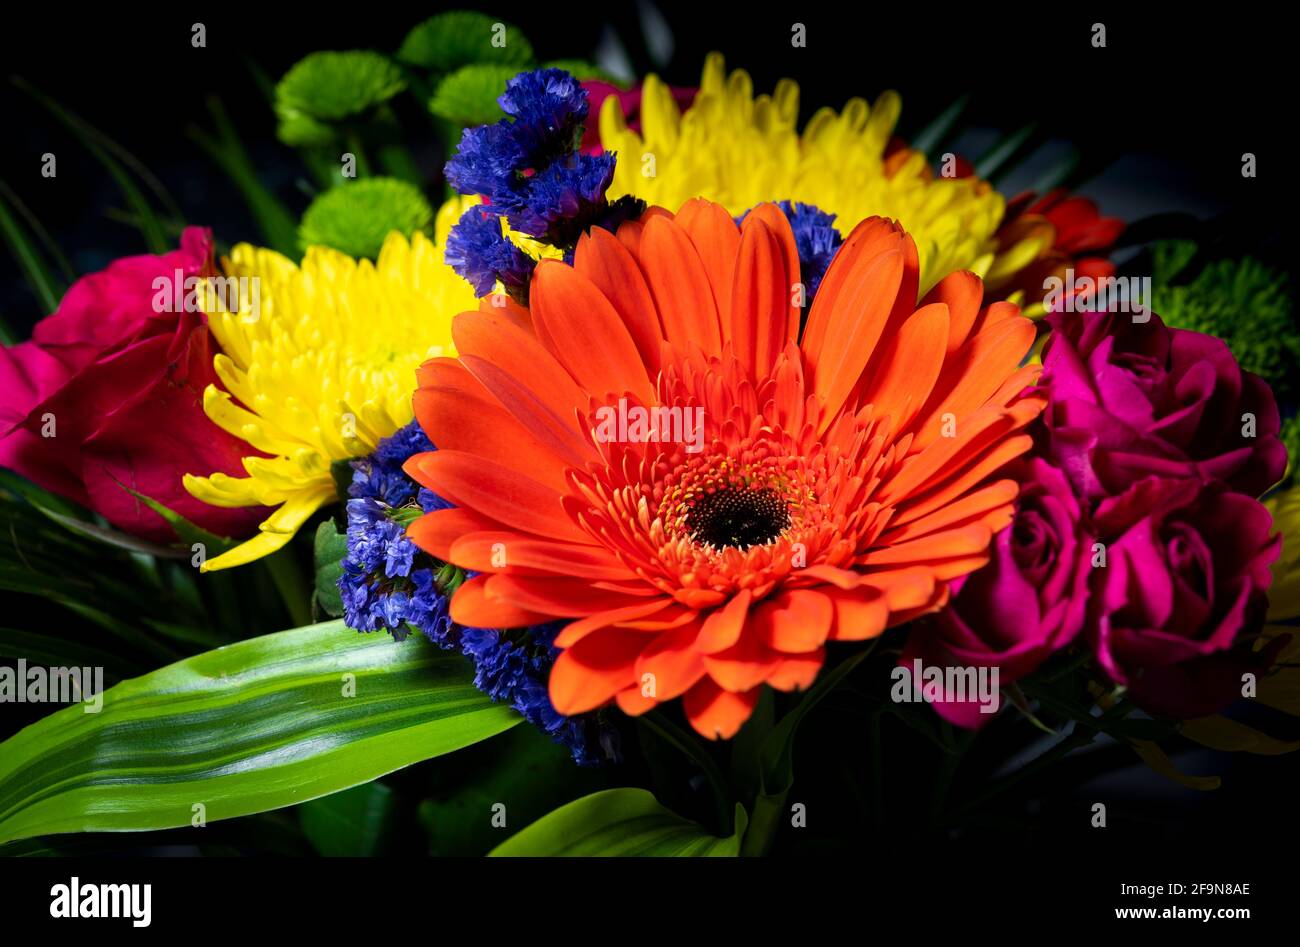 Mothers day floral arrangement, Mothers day flowers Stock Photo